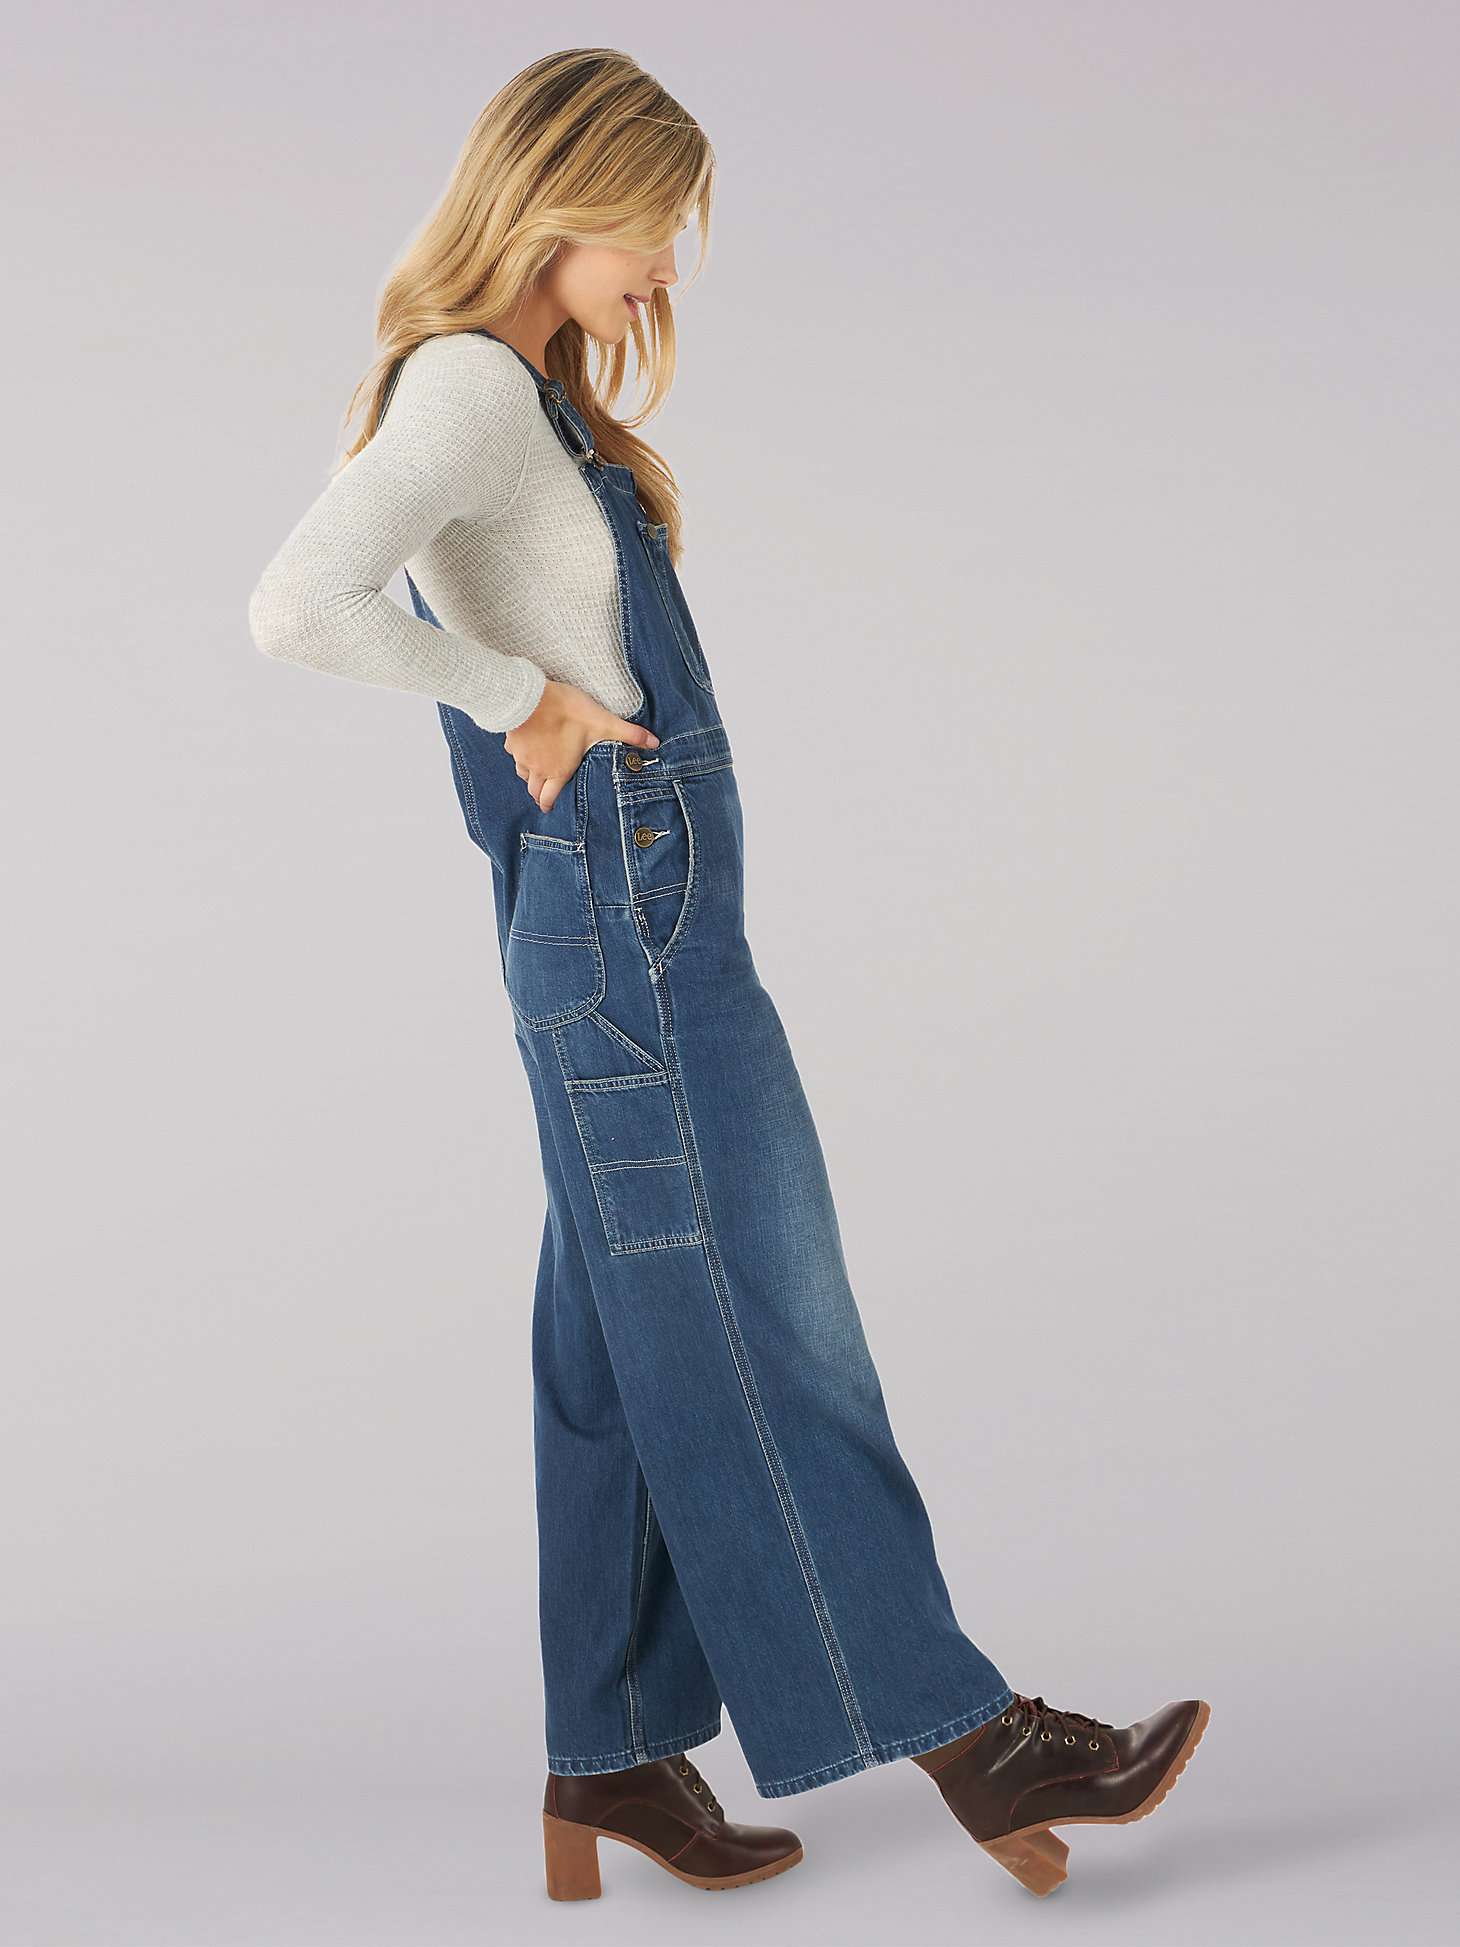 Women's Vintage Modern Relaxed Overall in Kansas Fade alternative view 2